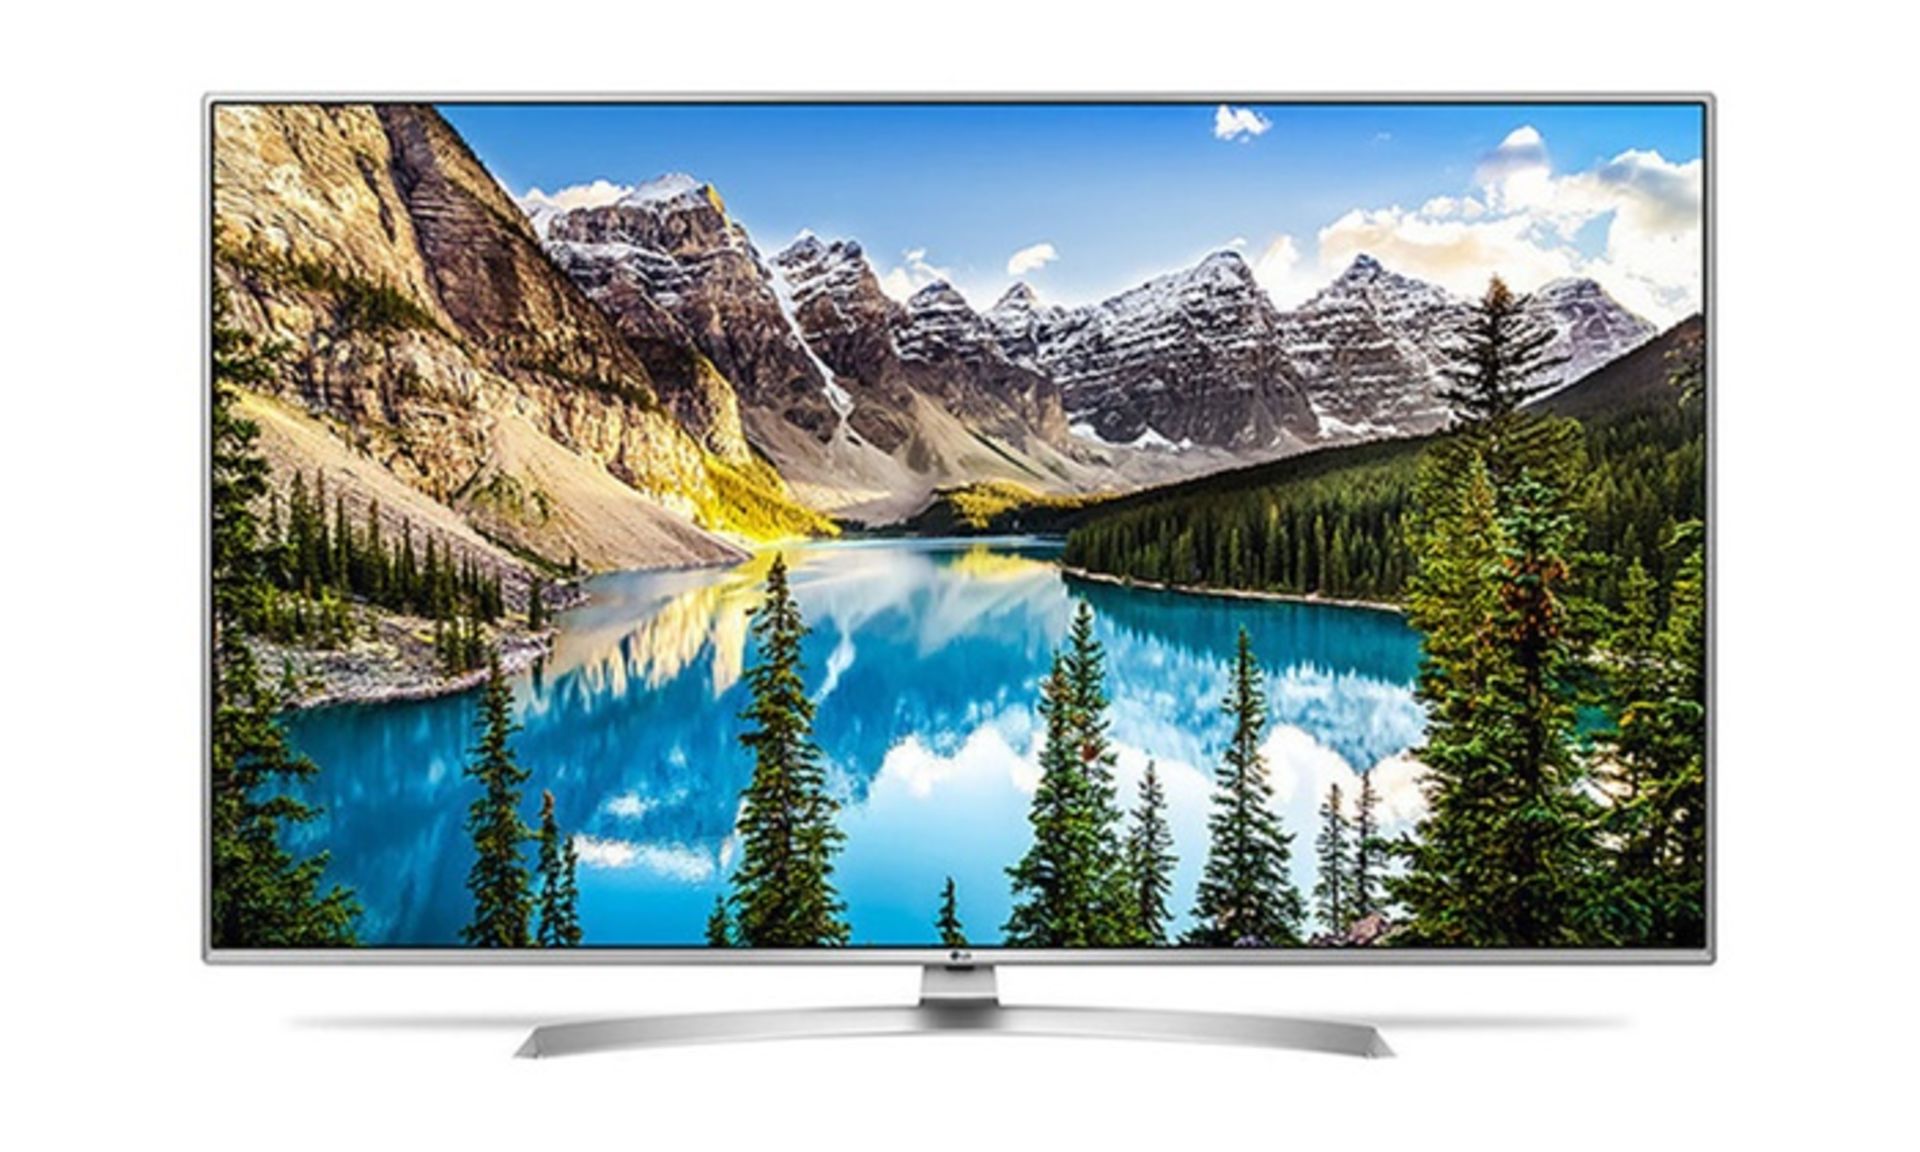 V Grade A LG 55 Inch ACTIVE HDR 4K ULTRA HD LED SMART TV WITH FREEVIEW HD & WEBOS & WIFI 55UJ701V